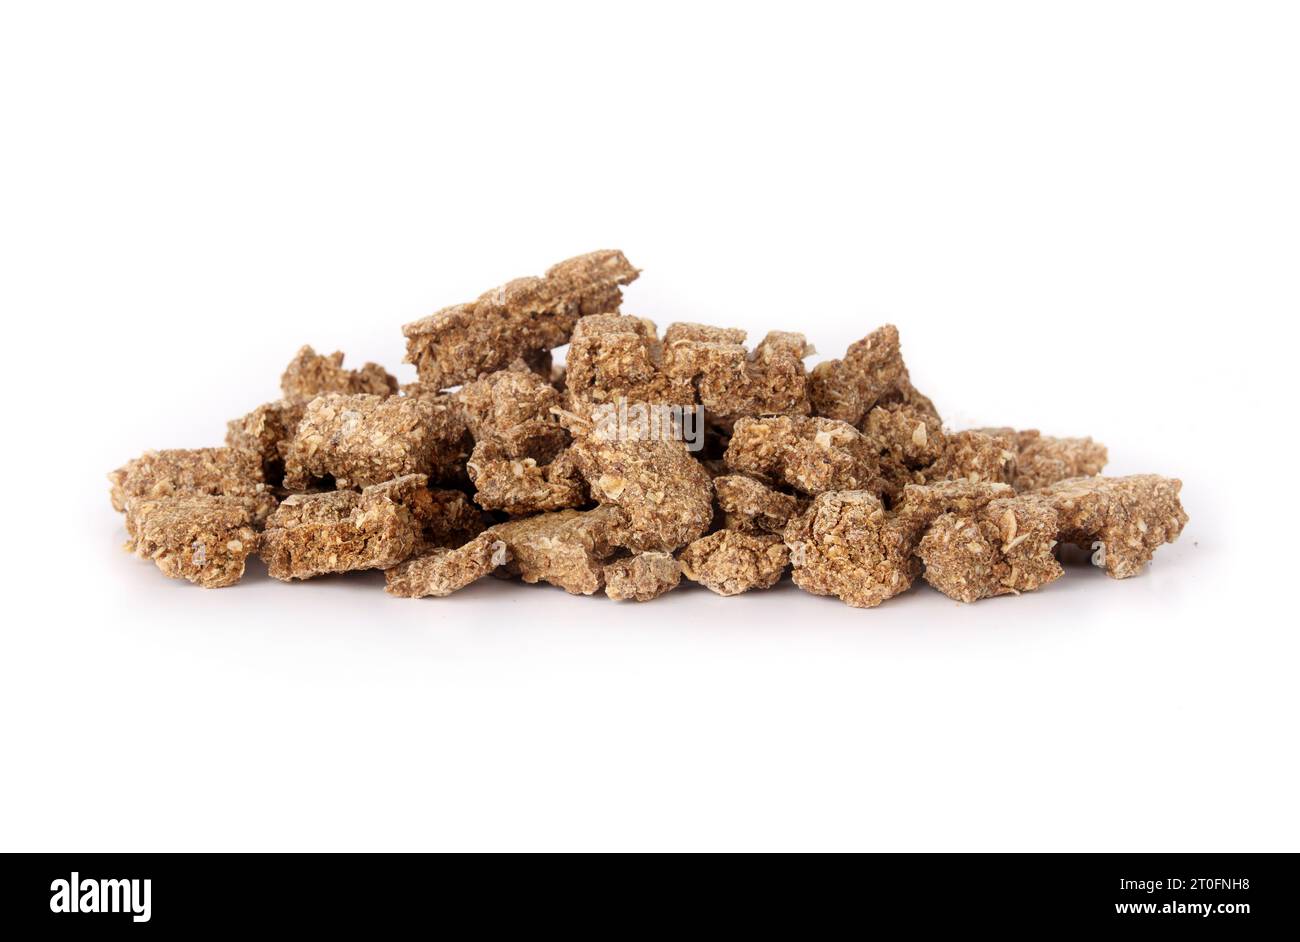 Pile of dried fish pieces for dogs and cats as snack, treat or reward. Heap of dehydrated flaky fish chunks to break. Healthy dog snack or health supp Stock Photo